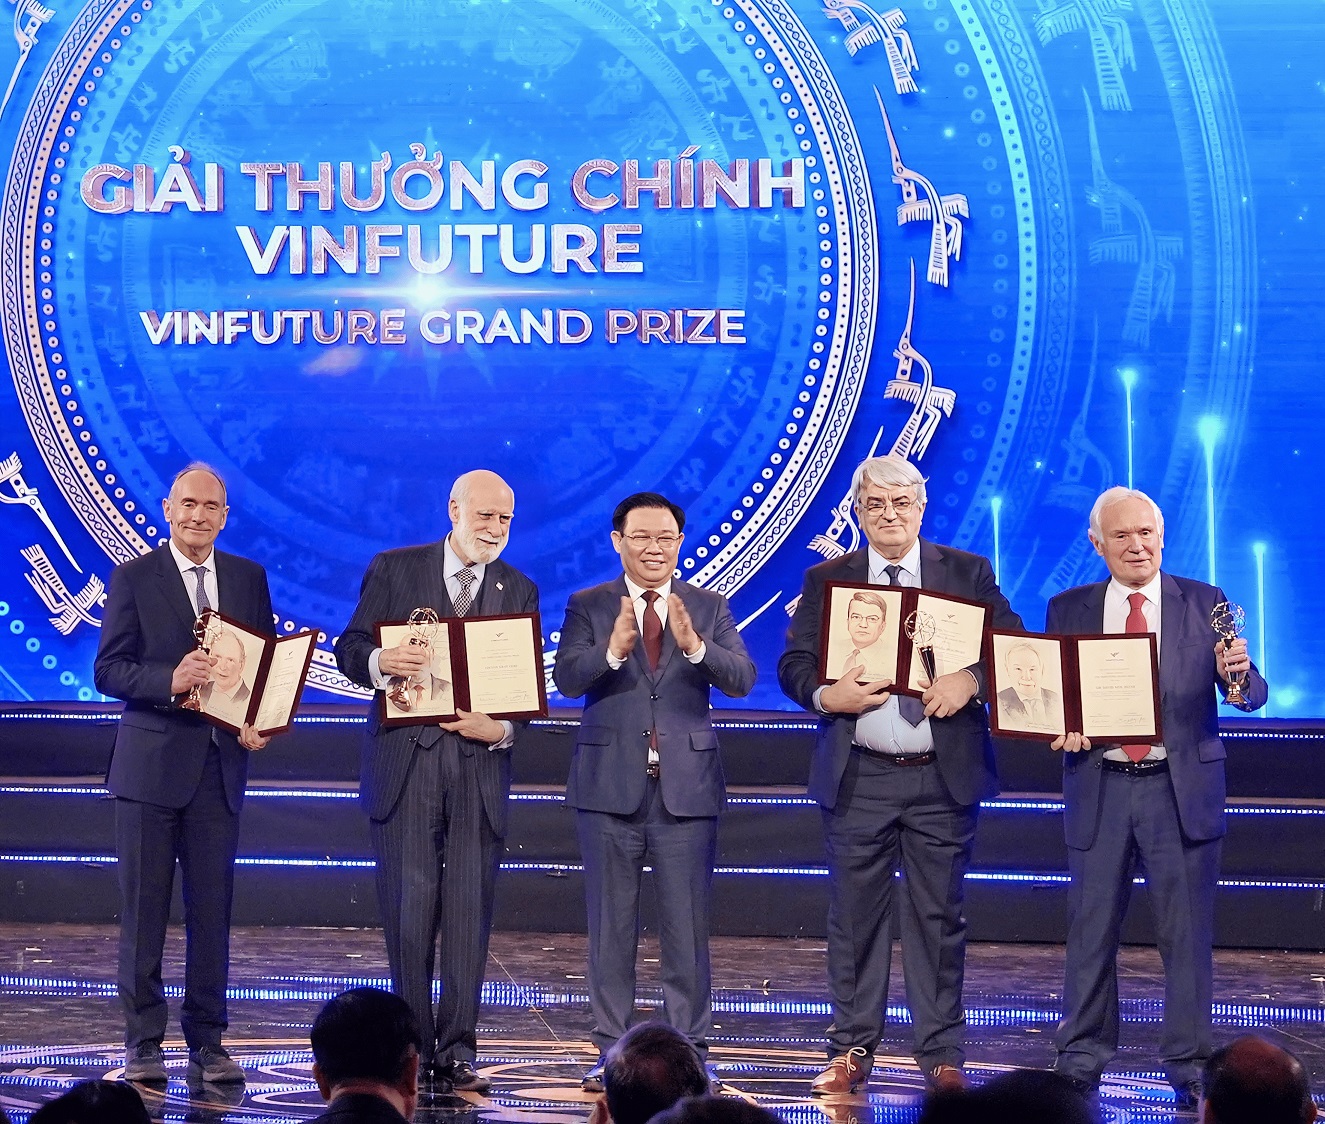 1,389 nominations for the third season of the VinFuture Prize